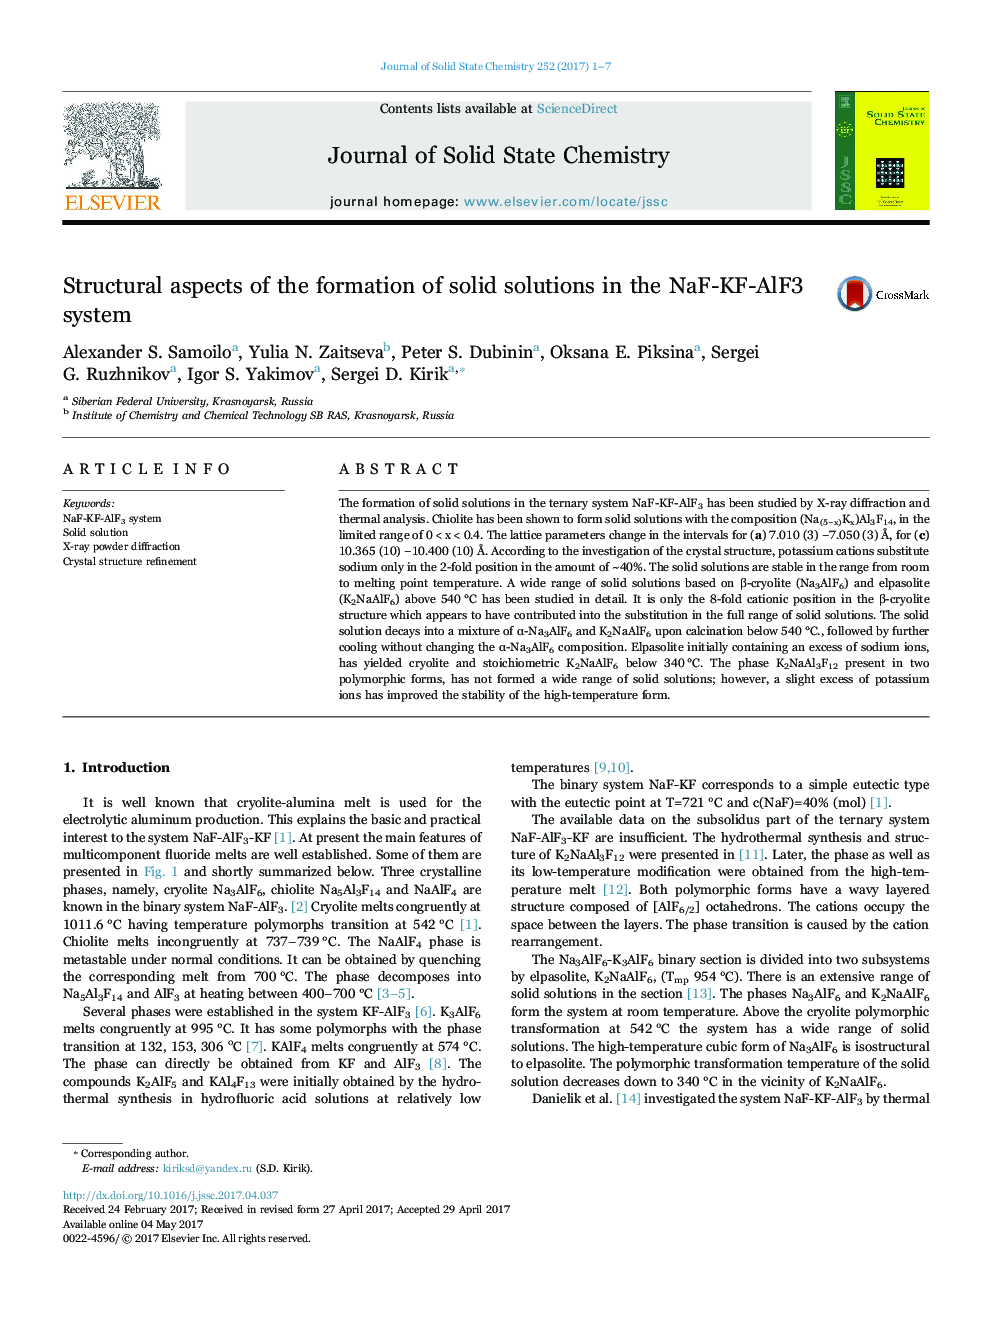 Structural aspects of the formation of solid solutions in the NaF-KF-AlF3 system